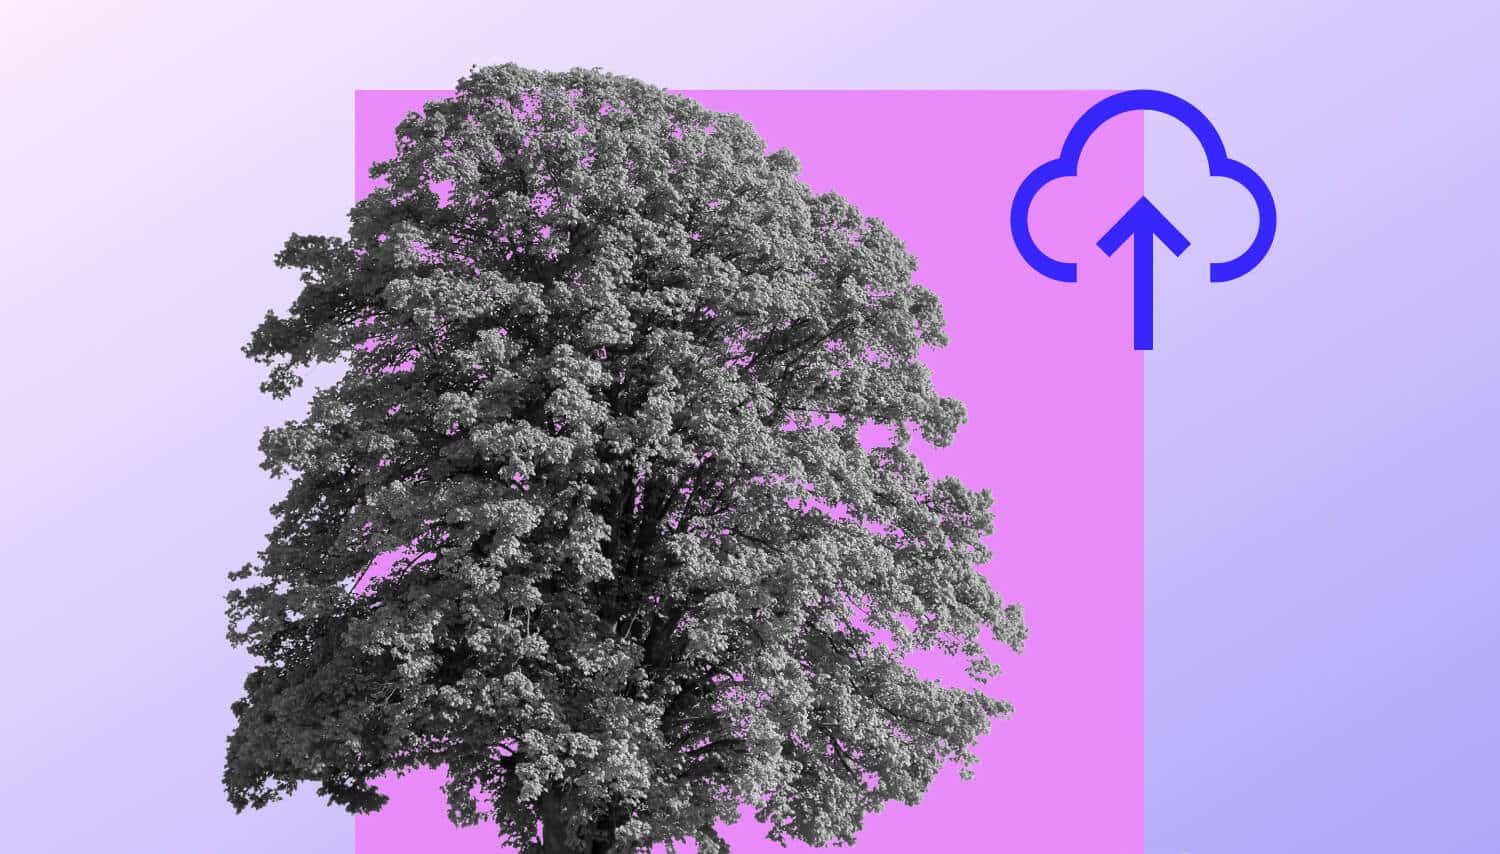 Tree on purple background with blue cloud symbol.